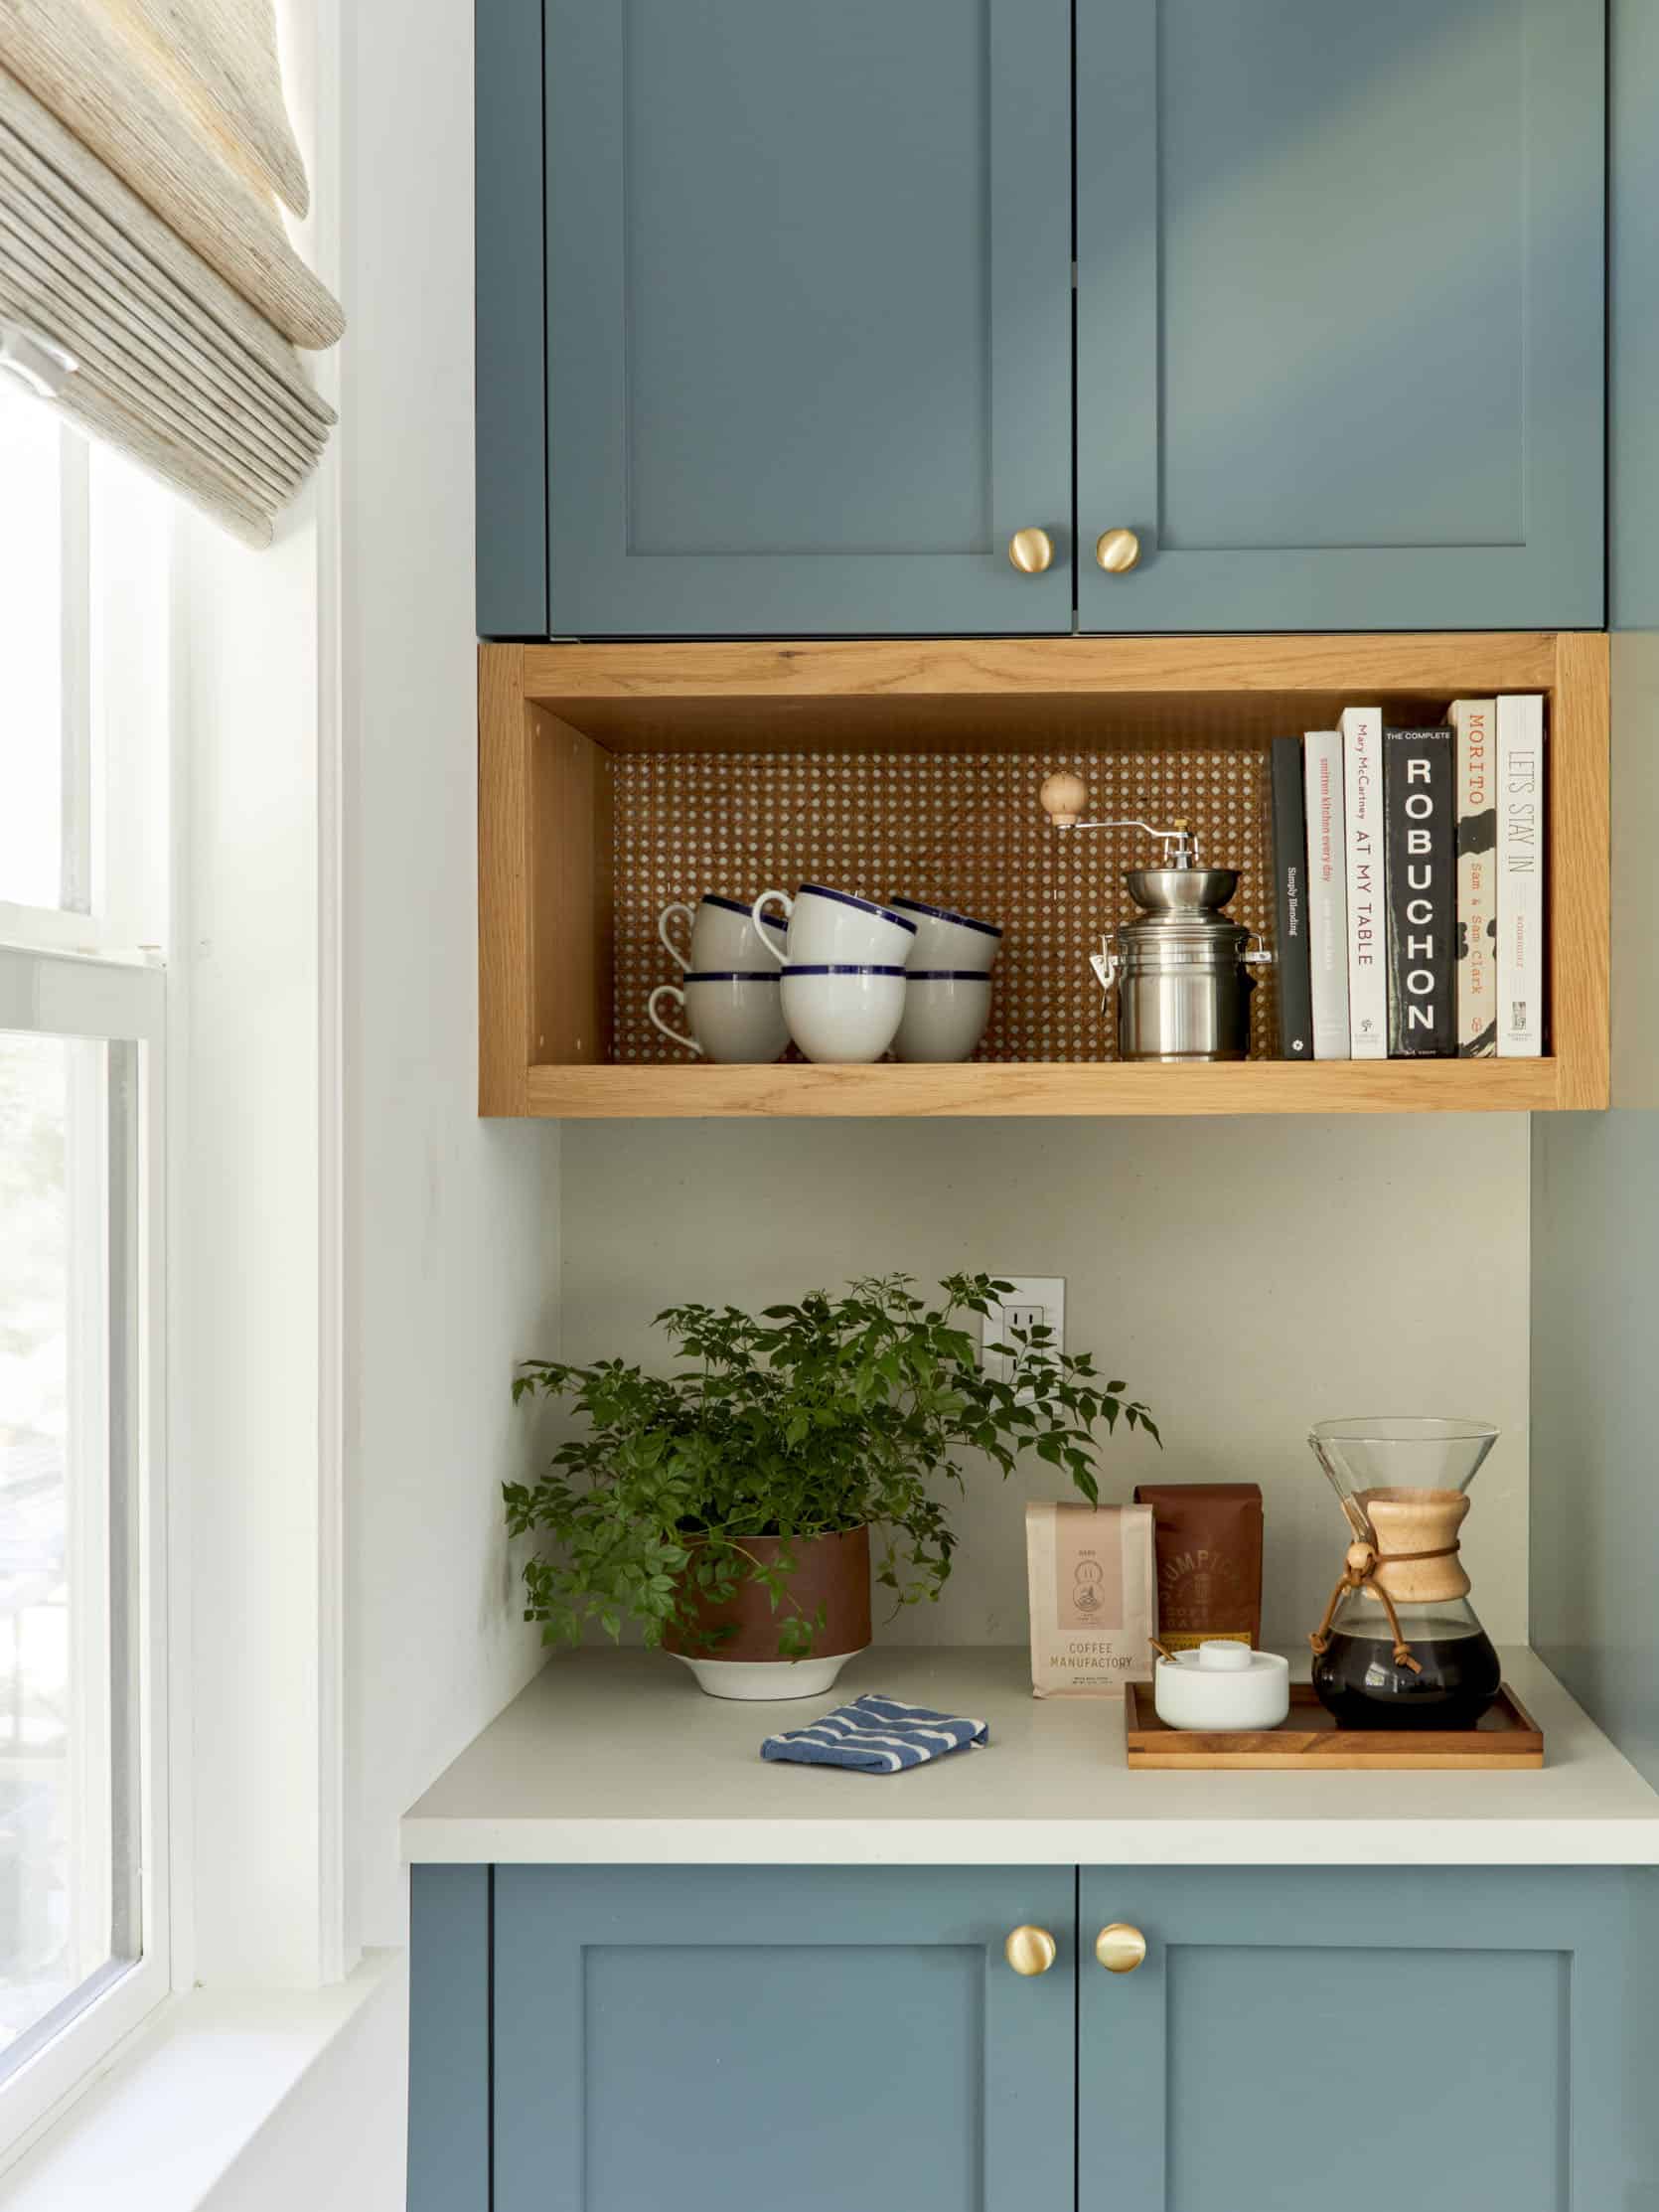  Wall-Mounted Wooden Shelves To Store Cookbooks 